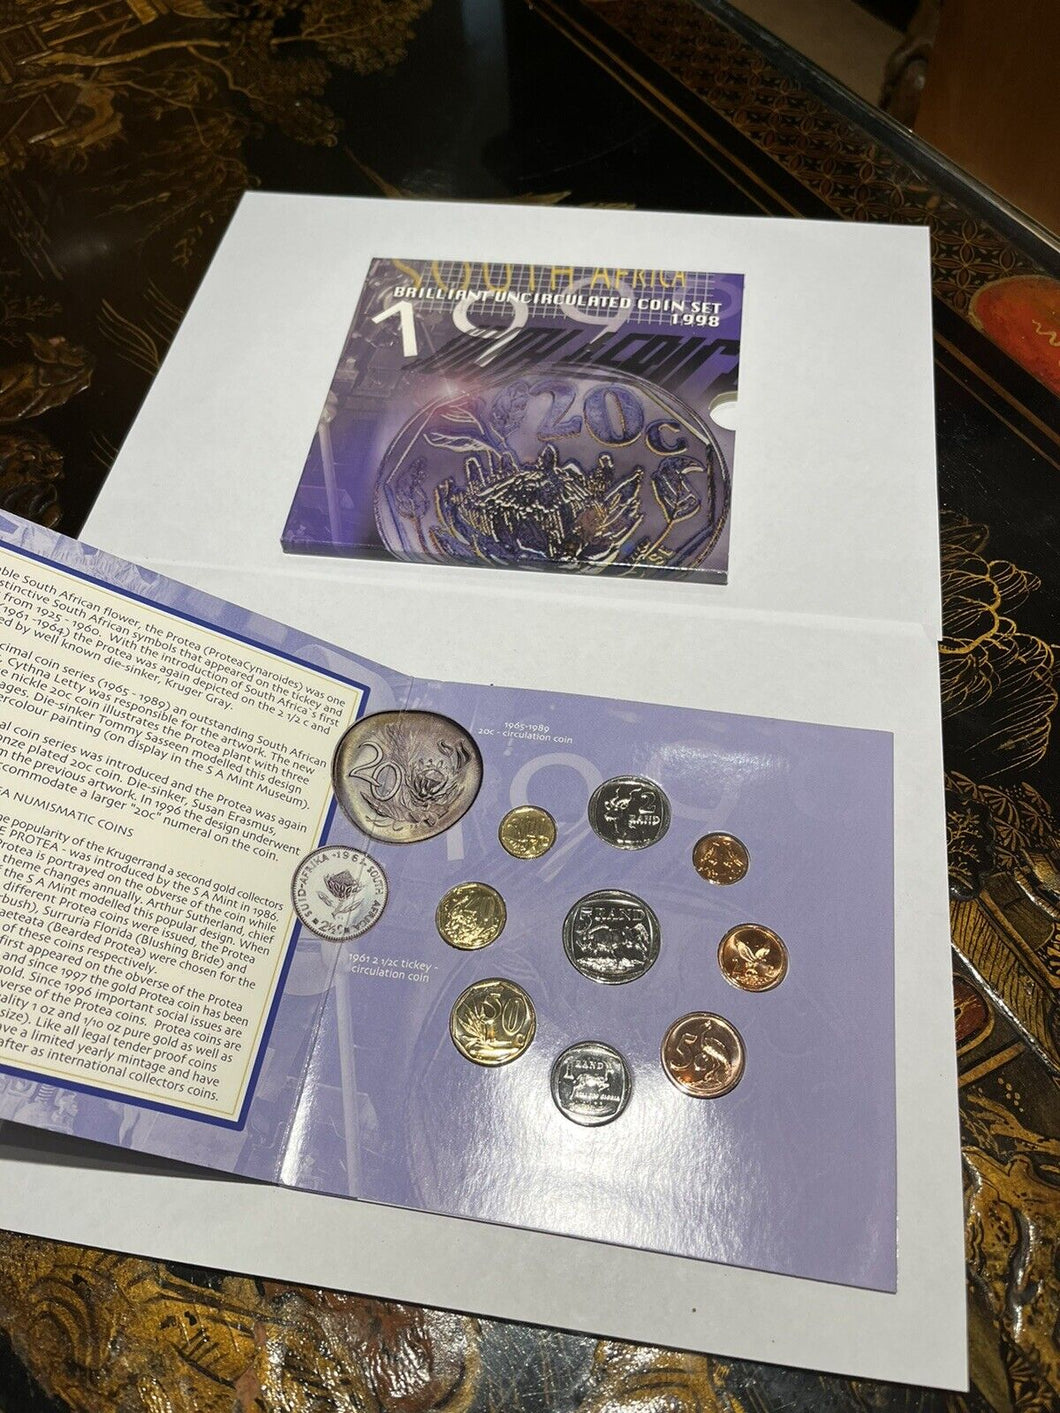 1998 South Africa Brilliant Uncirculated Coin Set